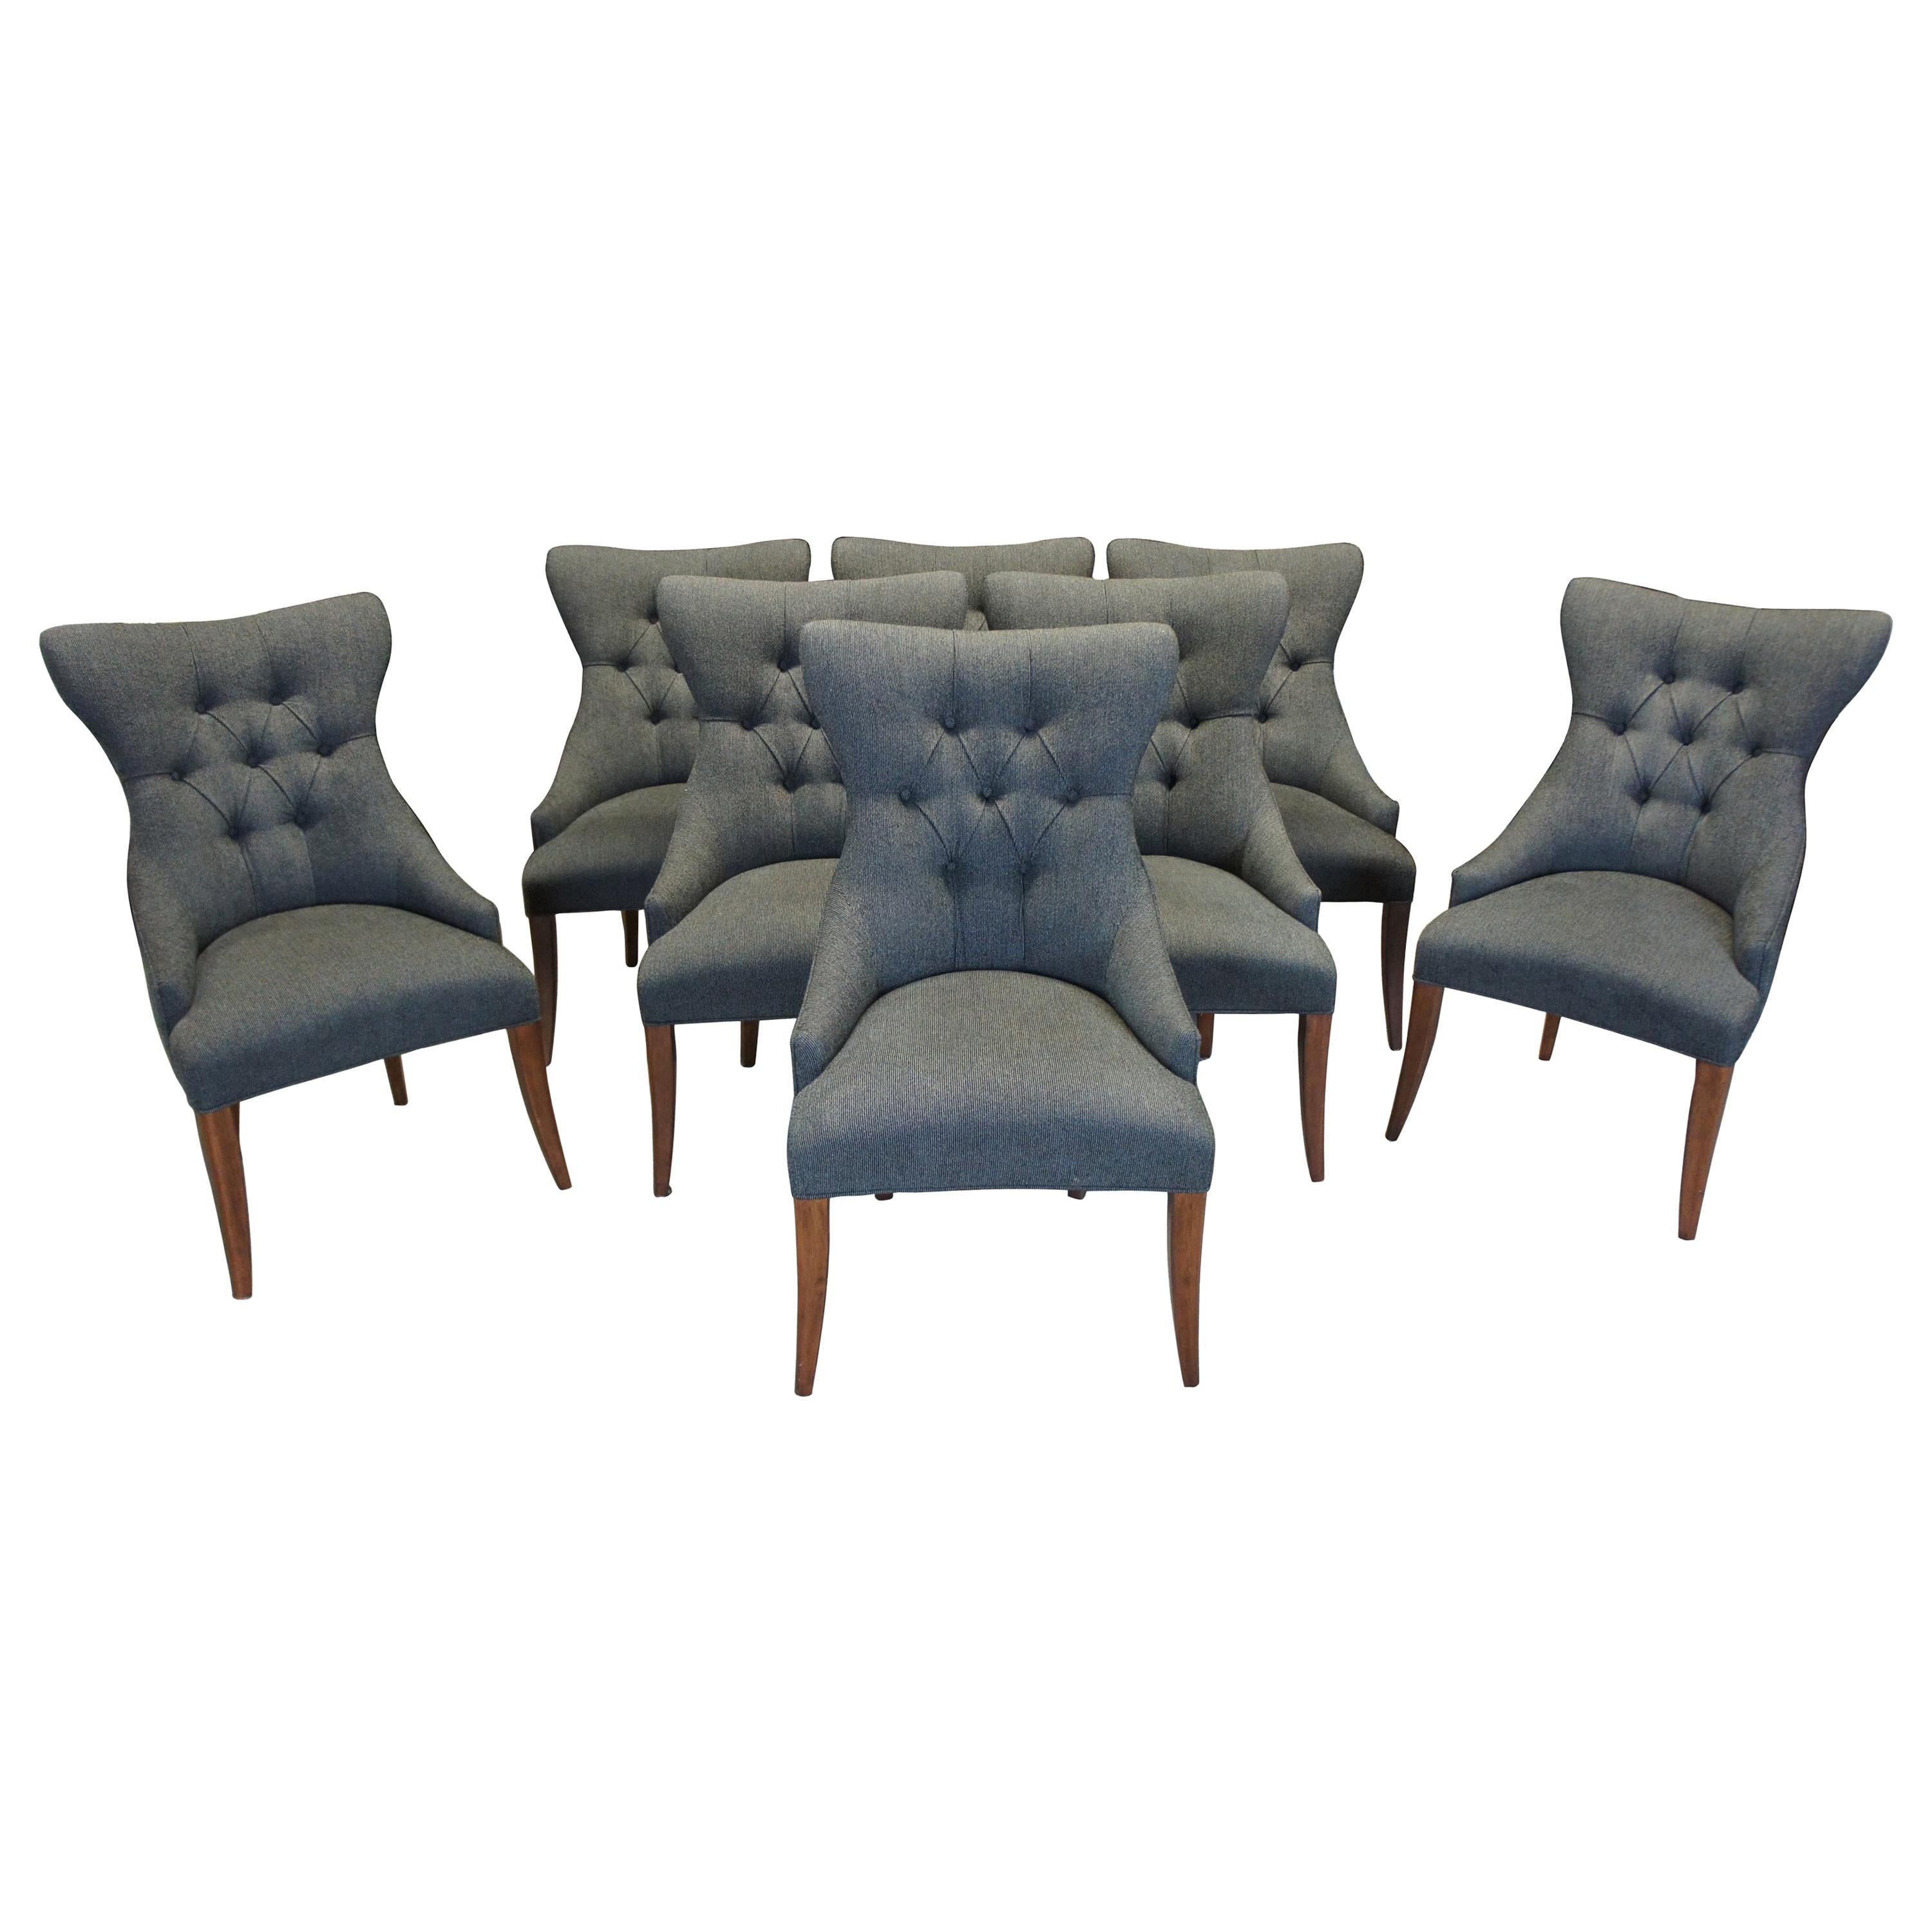 8 Bernhardt Deco Tufted Back Low Arm Dining Chairs Gray Coco 319-452